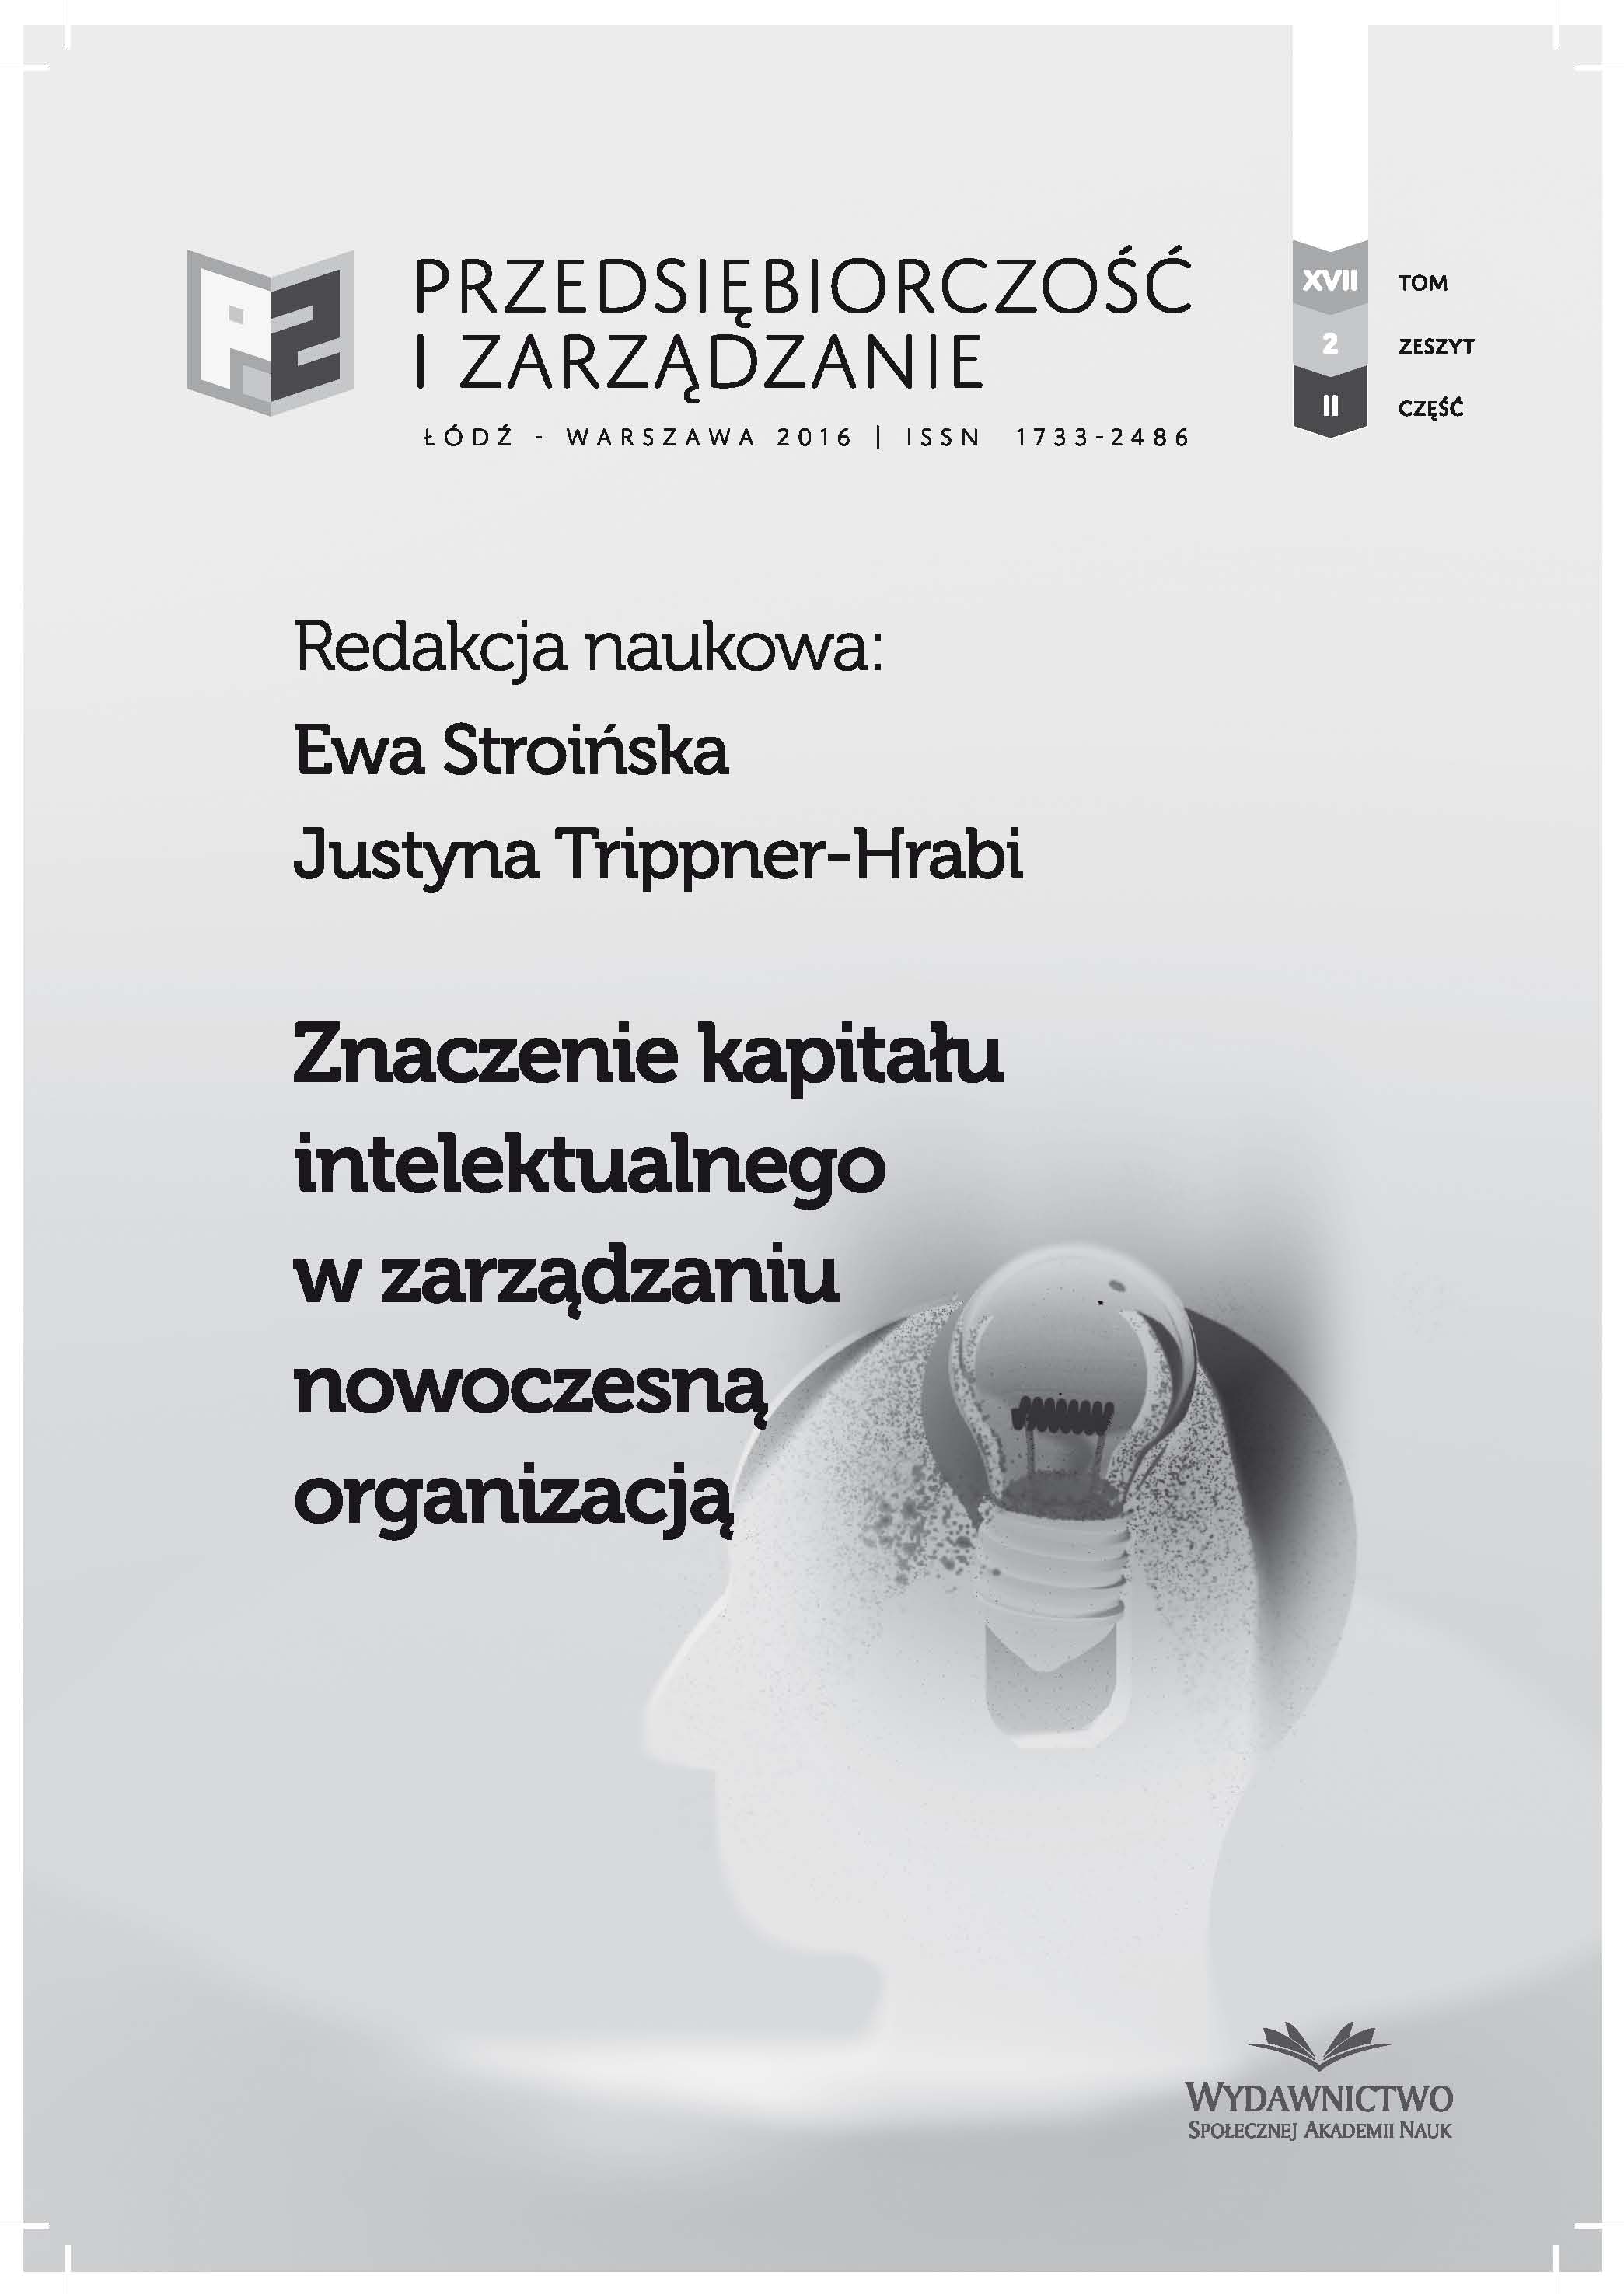 Stimulating the Development of Human and Social Capital in
the Region of Lodz - the Analysis of Selected Initiatives Cover Image